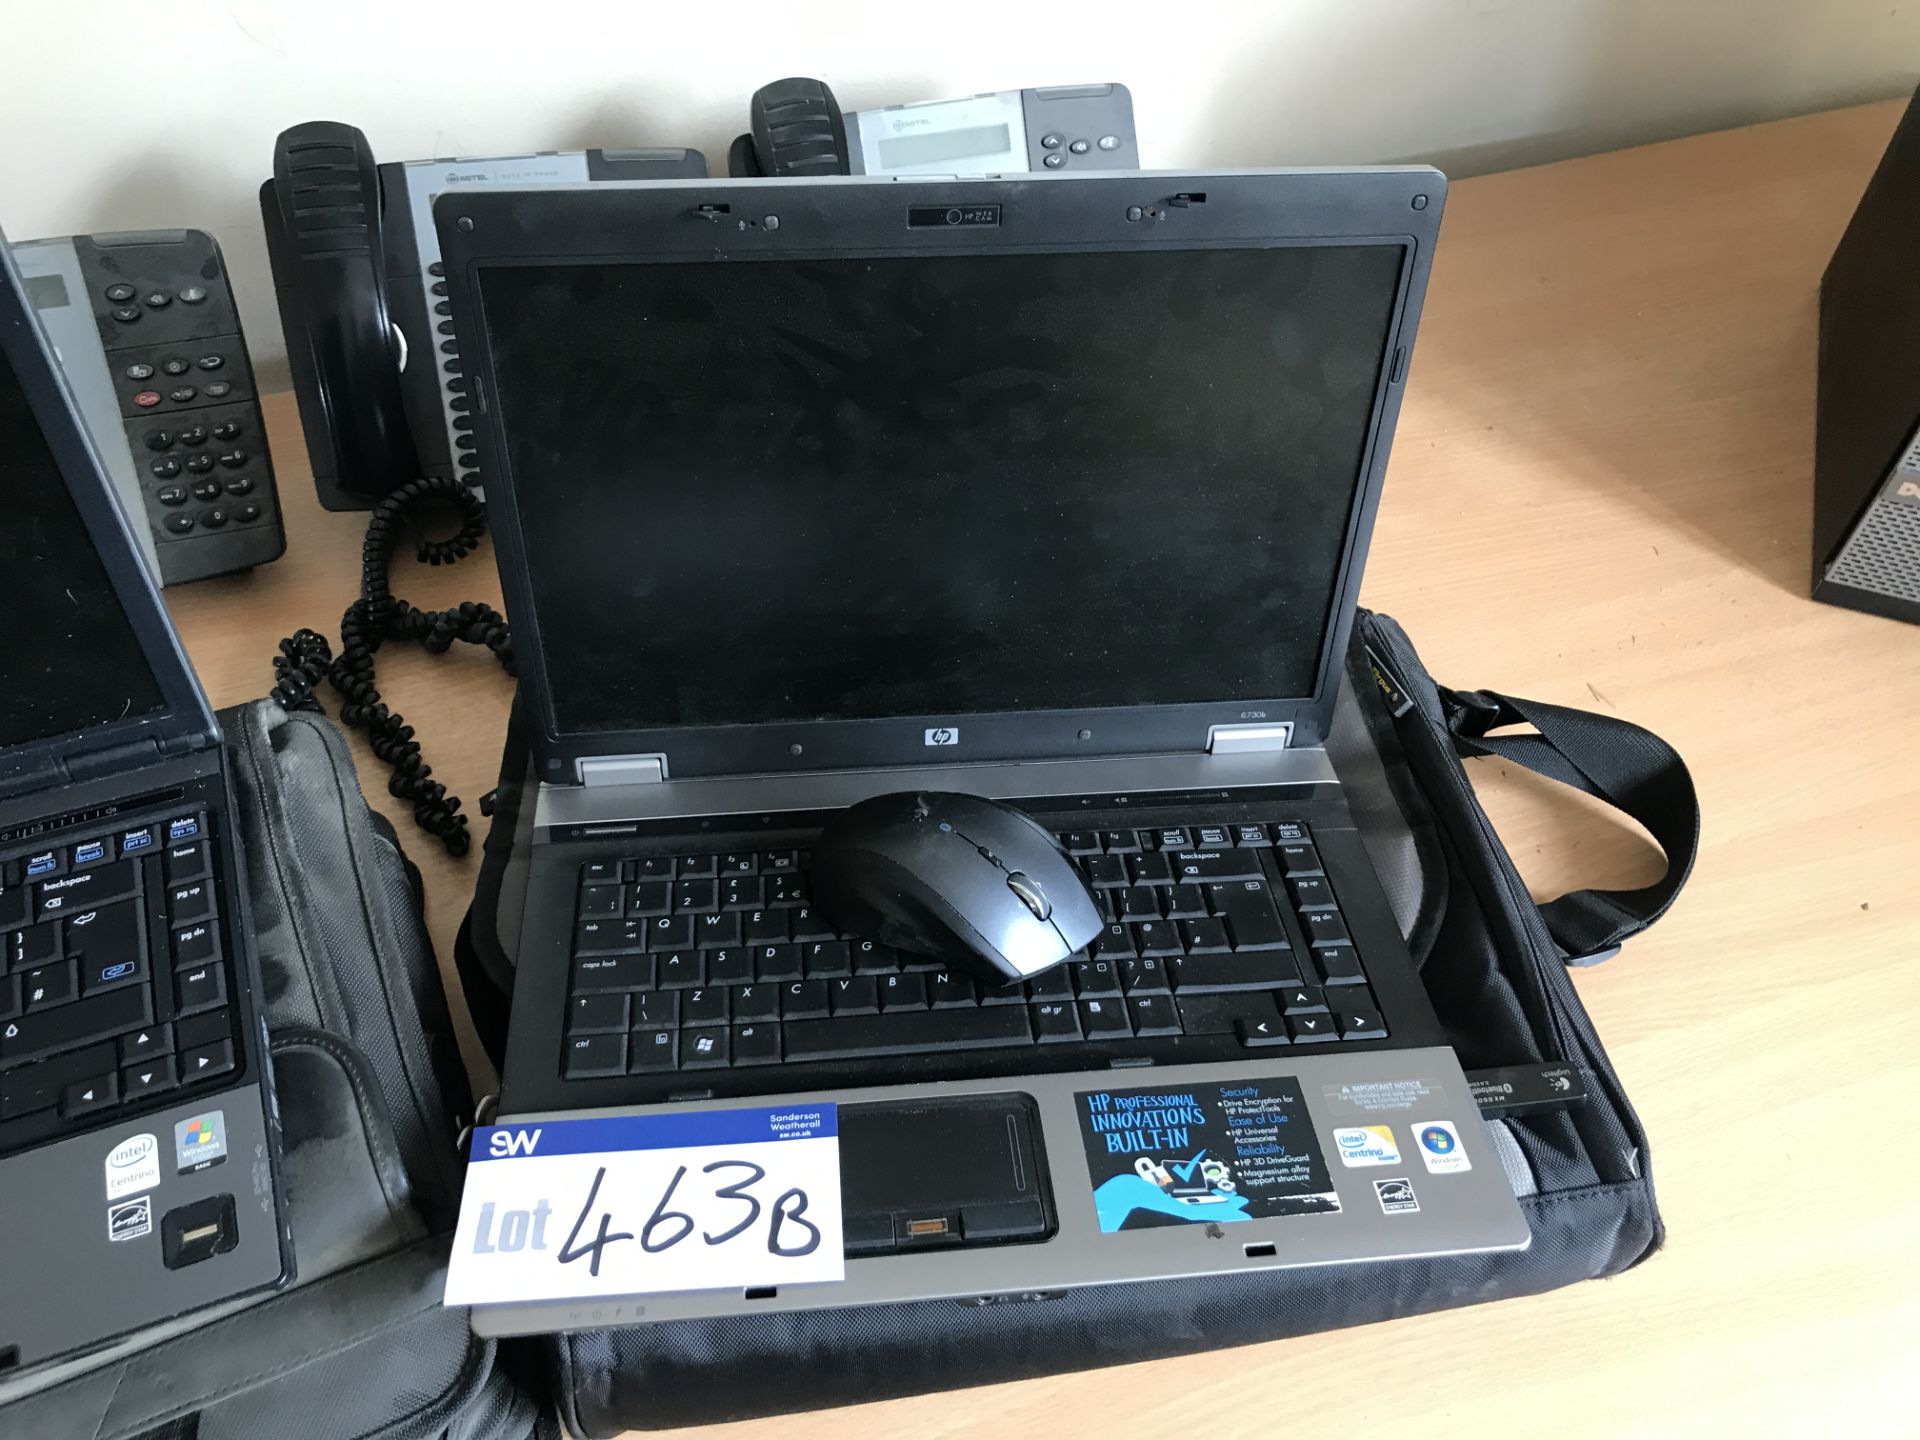 HP 6730B Intel Centrino Laptop (hard disk removed), with carry case (lot located at Bedfords Limited